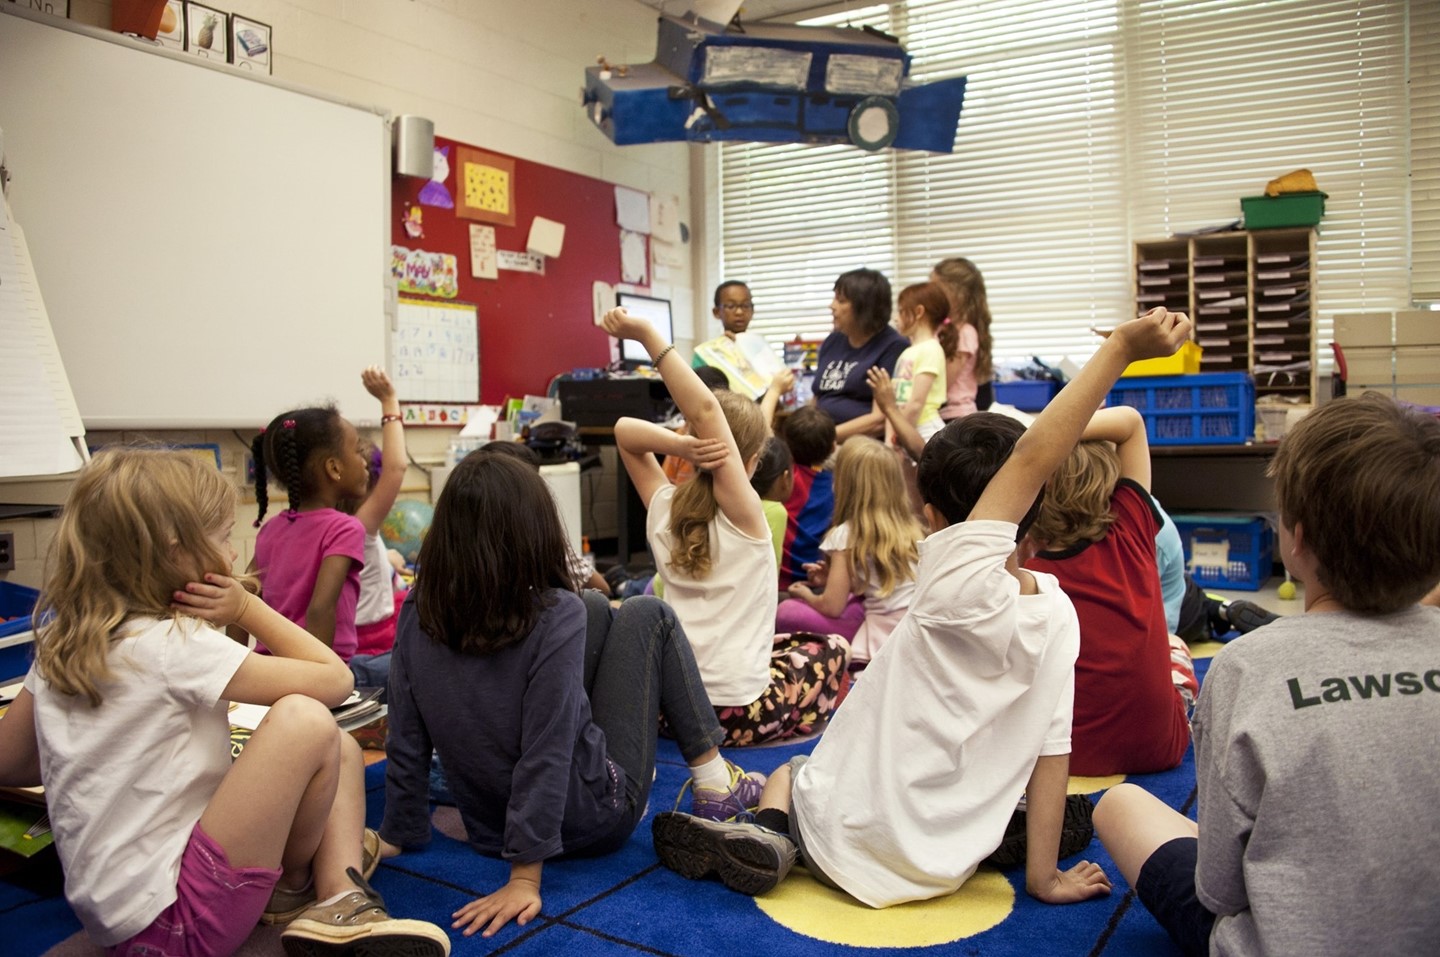 Children sitting on a classroom floor with their arms raised to answer questions as they listen to a teacher.